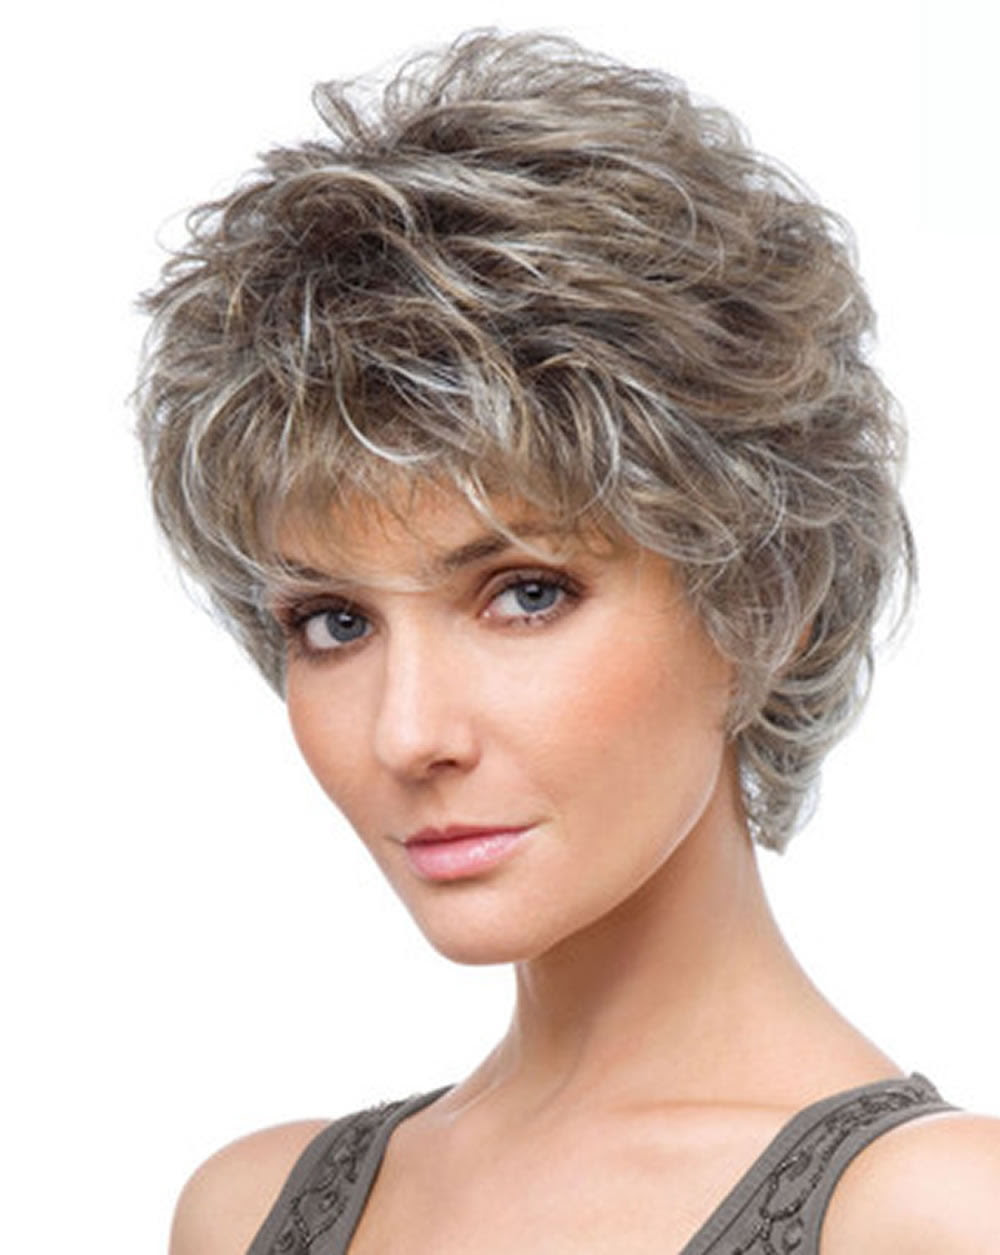 Haircut Ideas 23 Easy Short Hairstyles For Older Women You